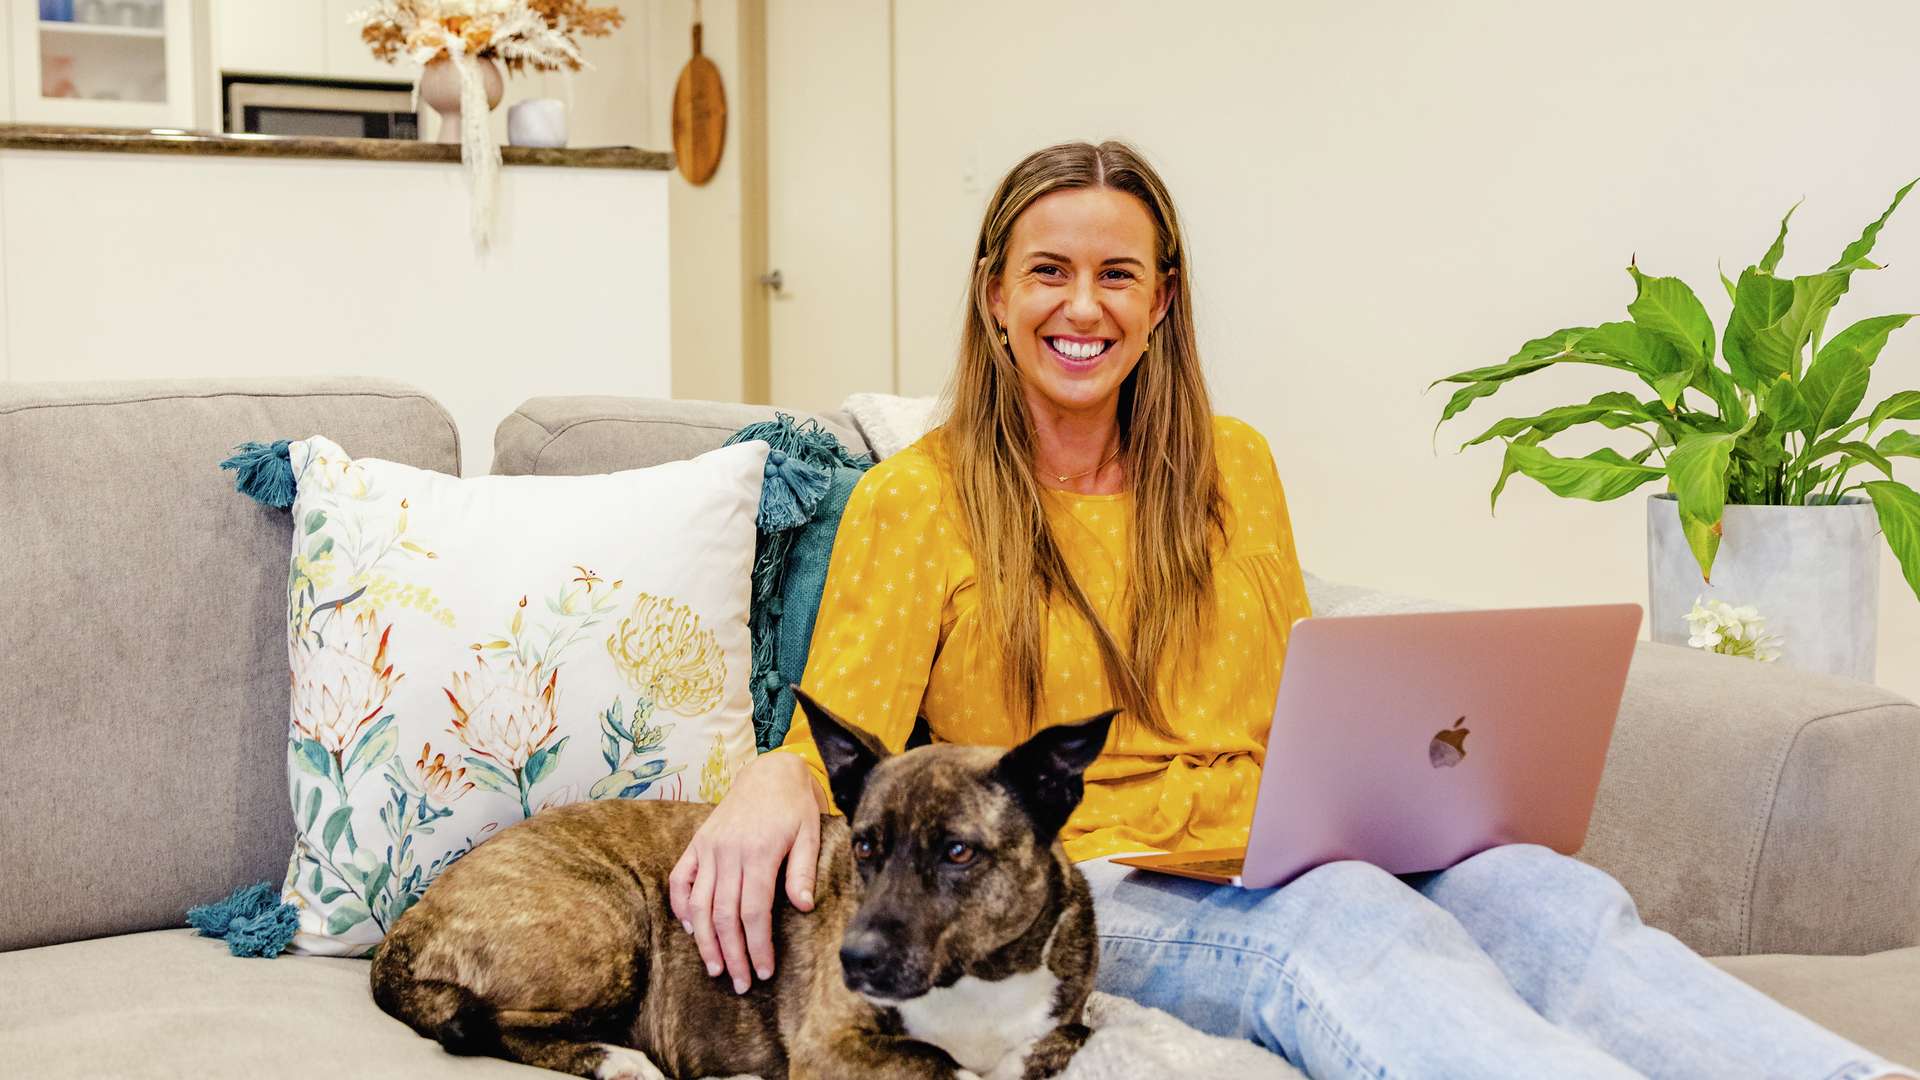 Person studying at home on laptop with dog on couch